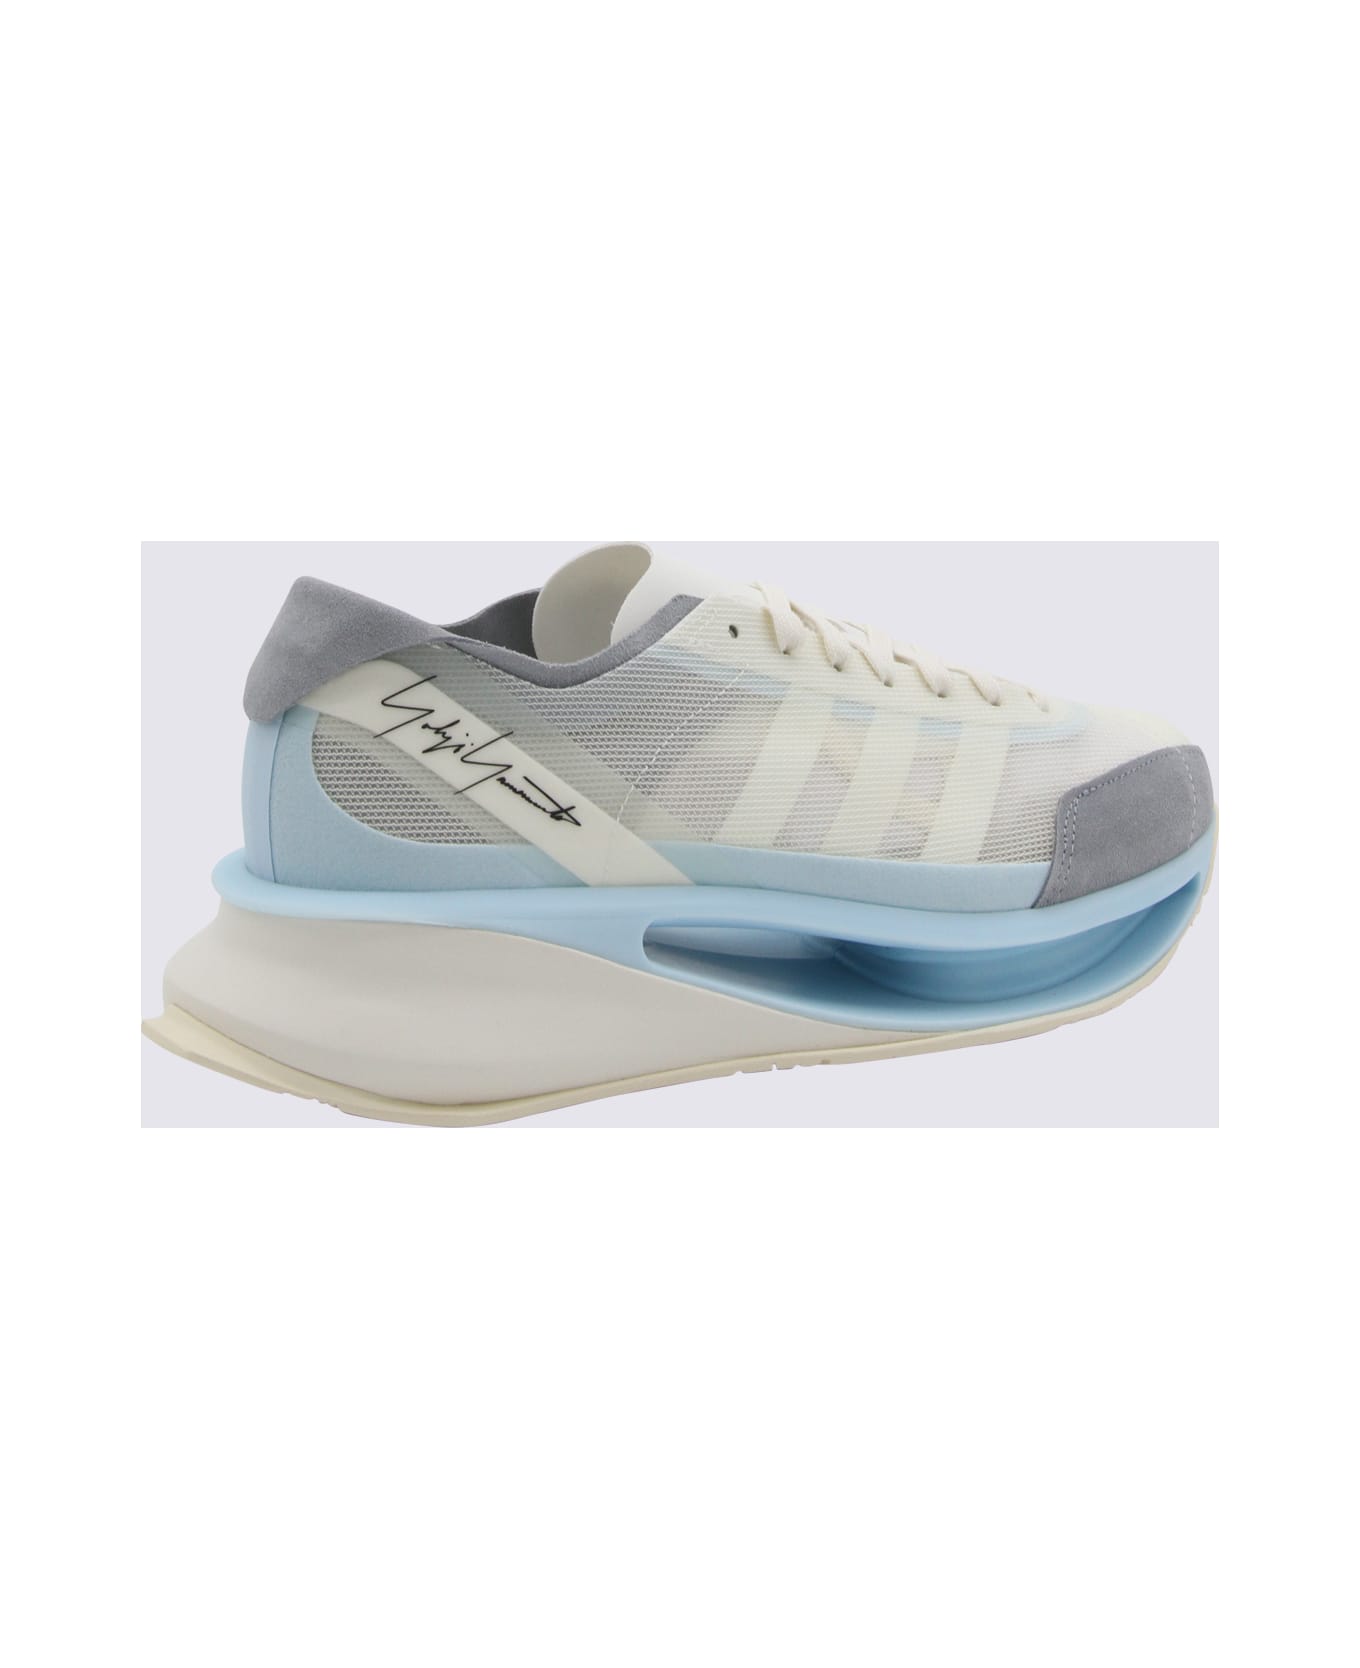 Y-3 Off White Sneakers - OFF WHITE/CREAM WHITE/ICE BLUE スニーカー